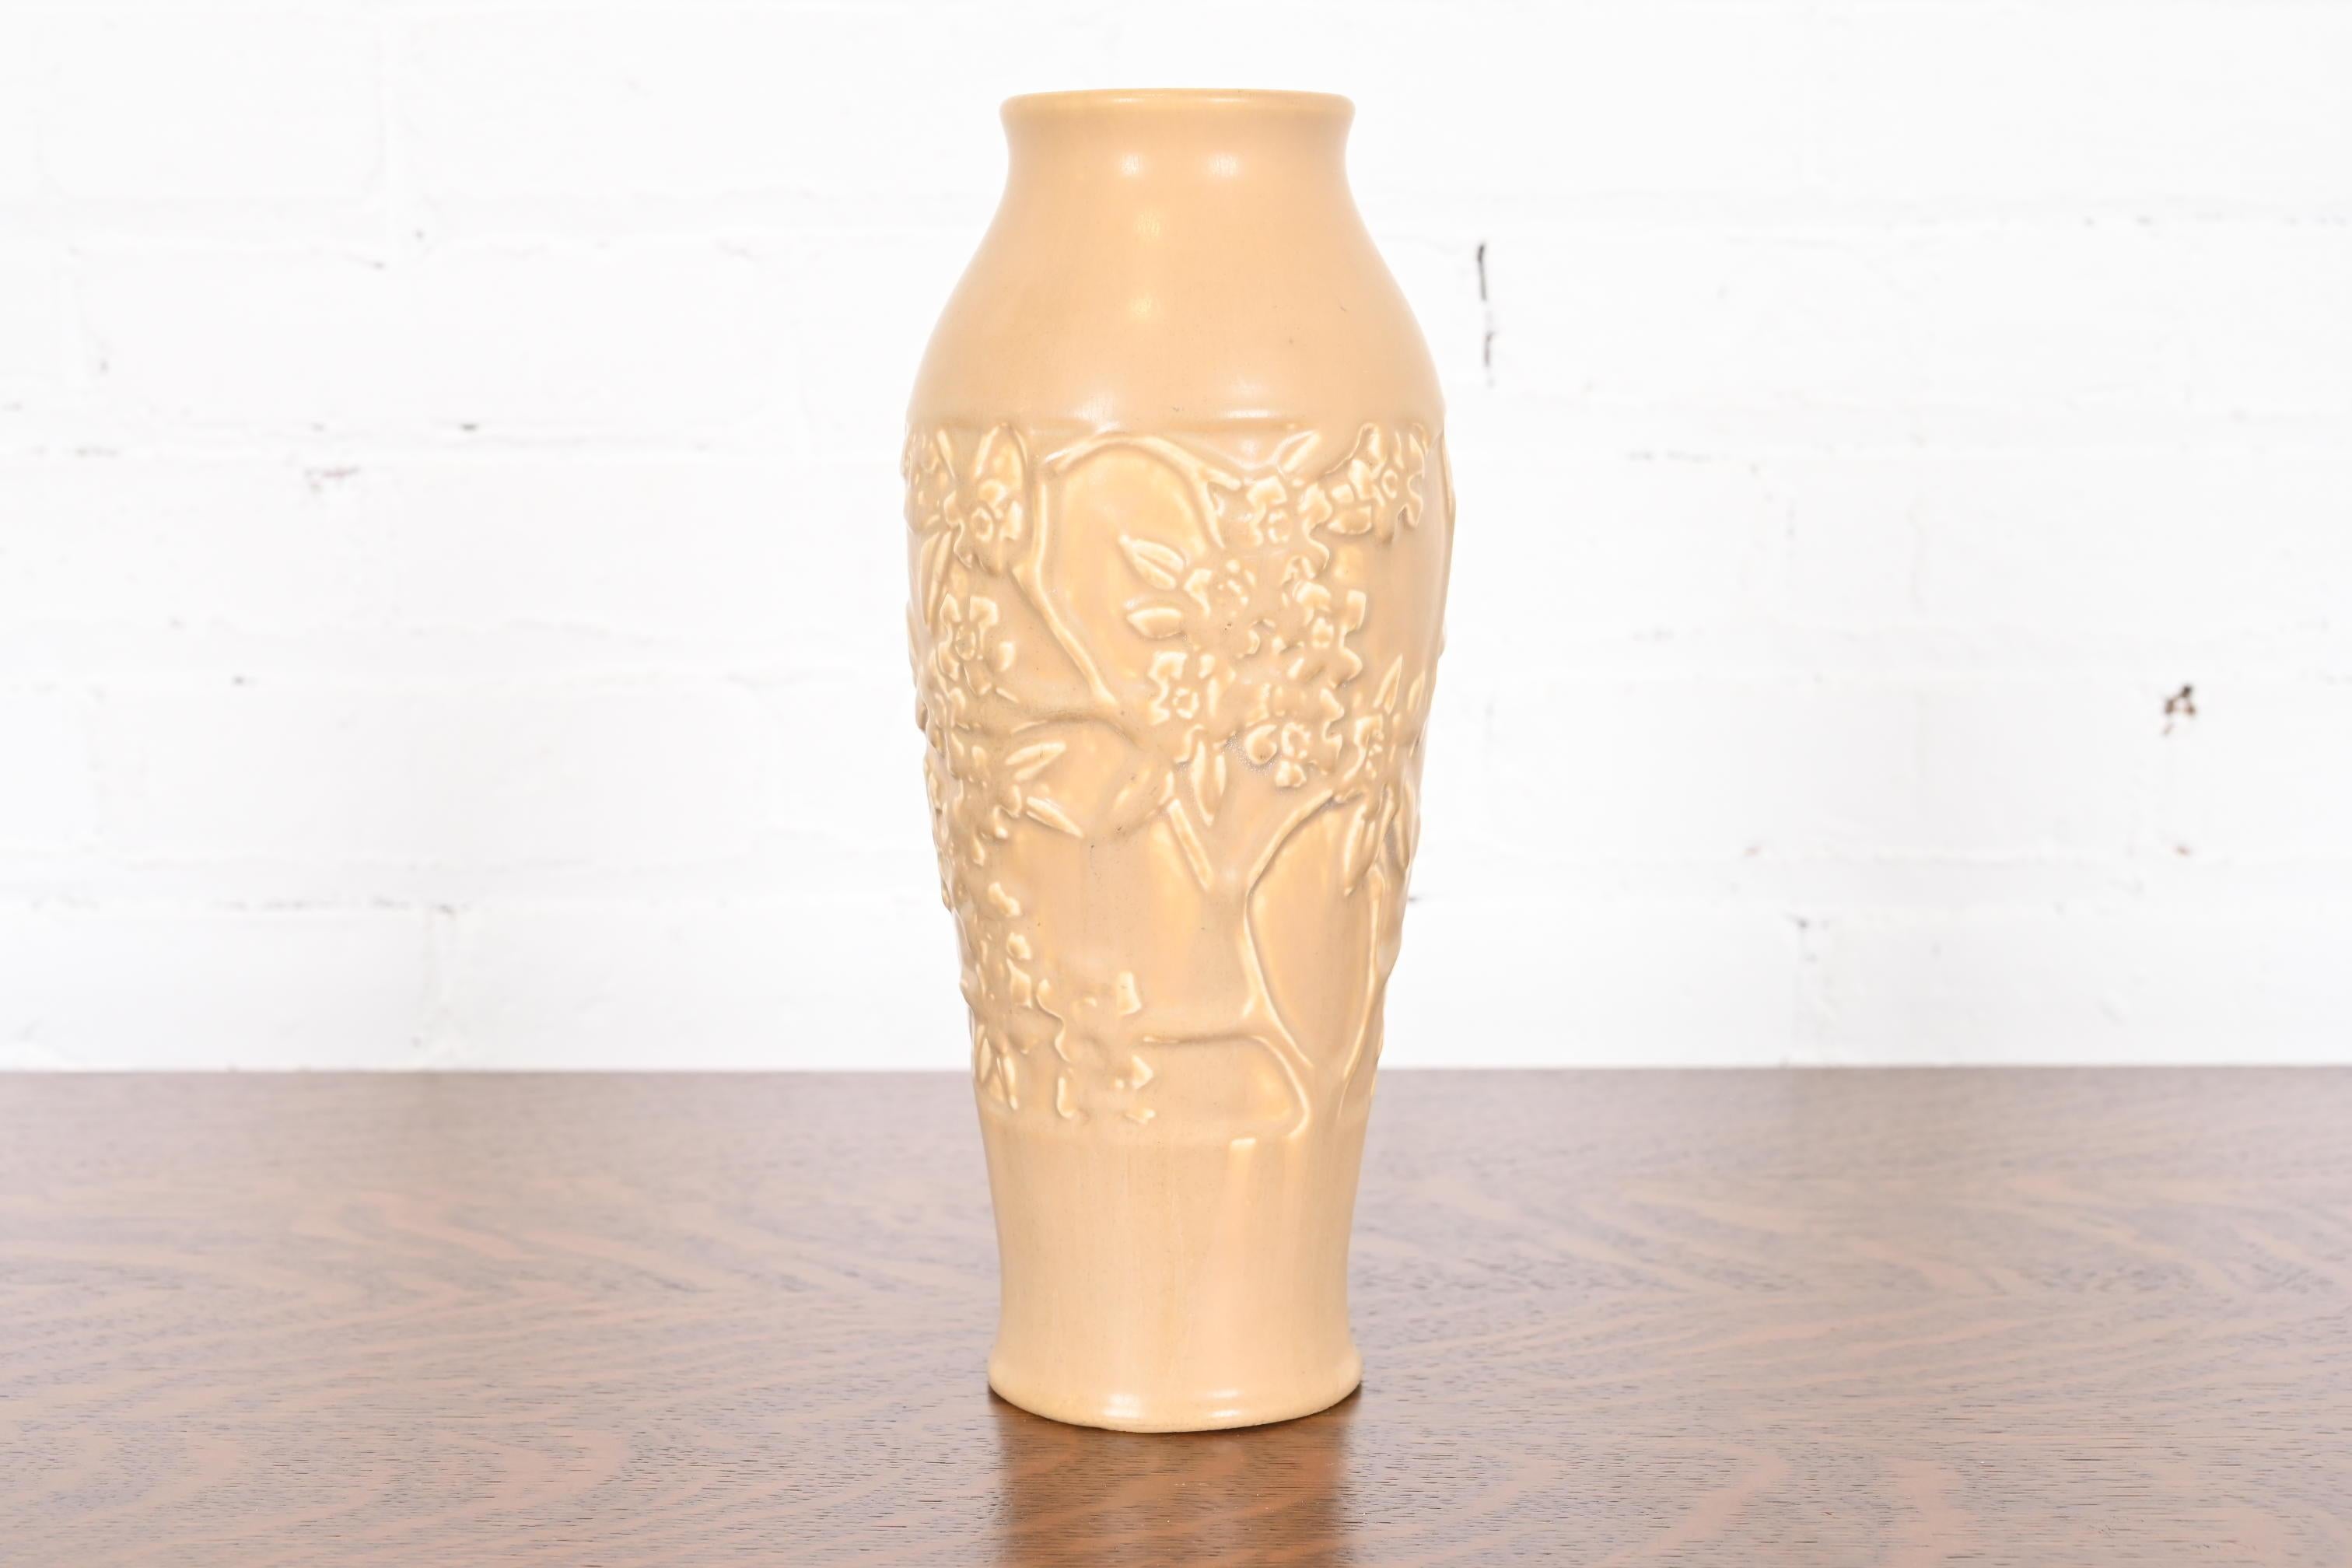 A gorgeous Arts & Crafts period large glazed art pottery vase with dogwood decoration

By Rookwood Pottery

USA, 1922

Glazed ceramic in a beautiful light tan color.

Measures: 4.25